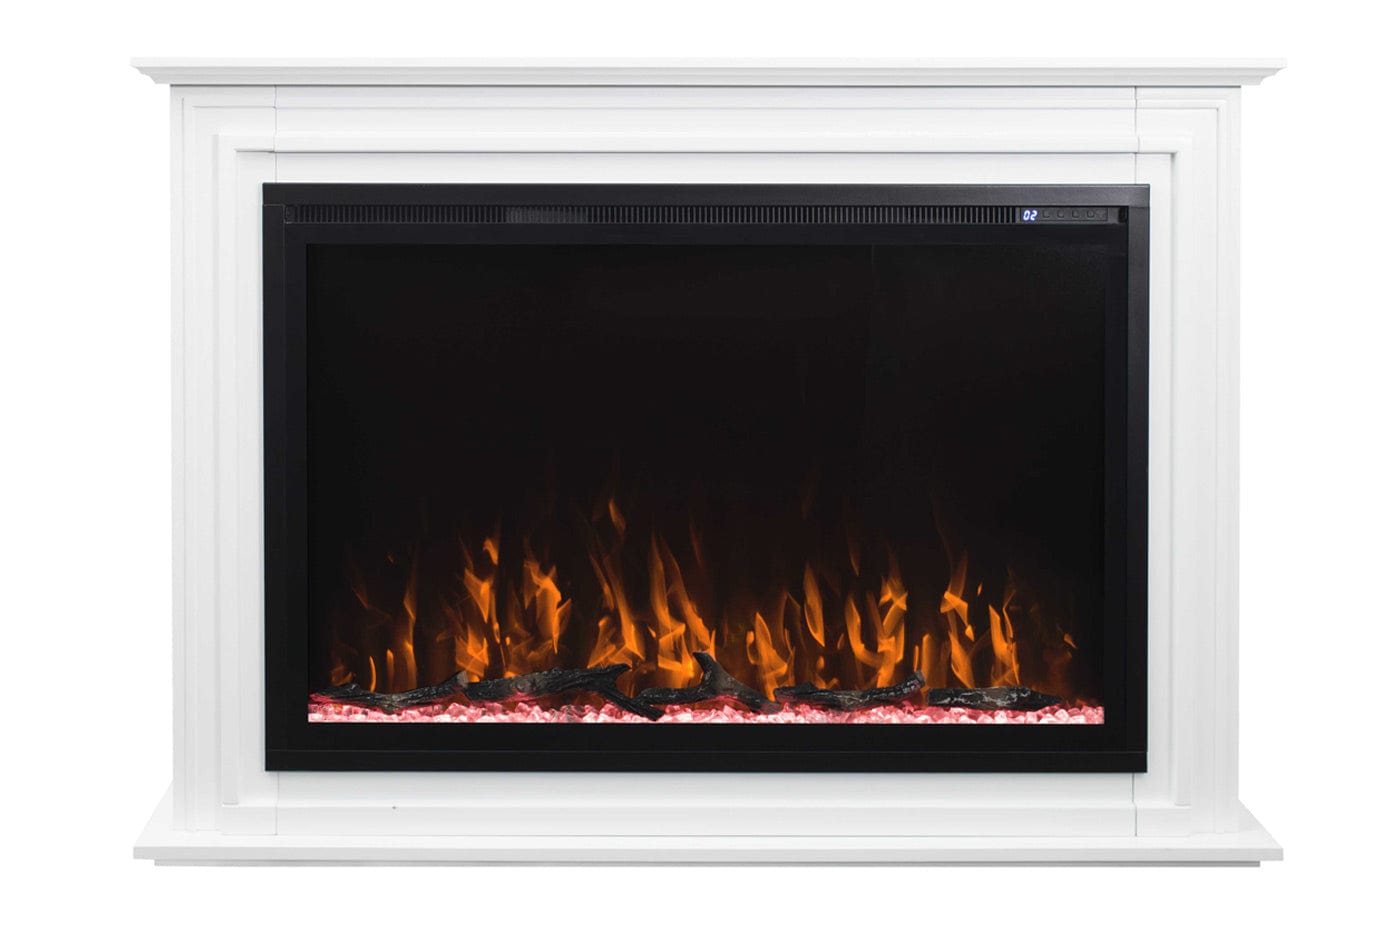 Encase surround mantel with Touchstone Sideline Elite 40-inch smart electric fireplace front view